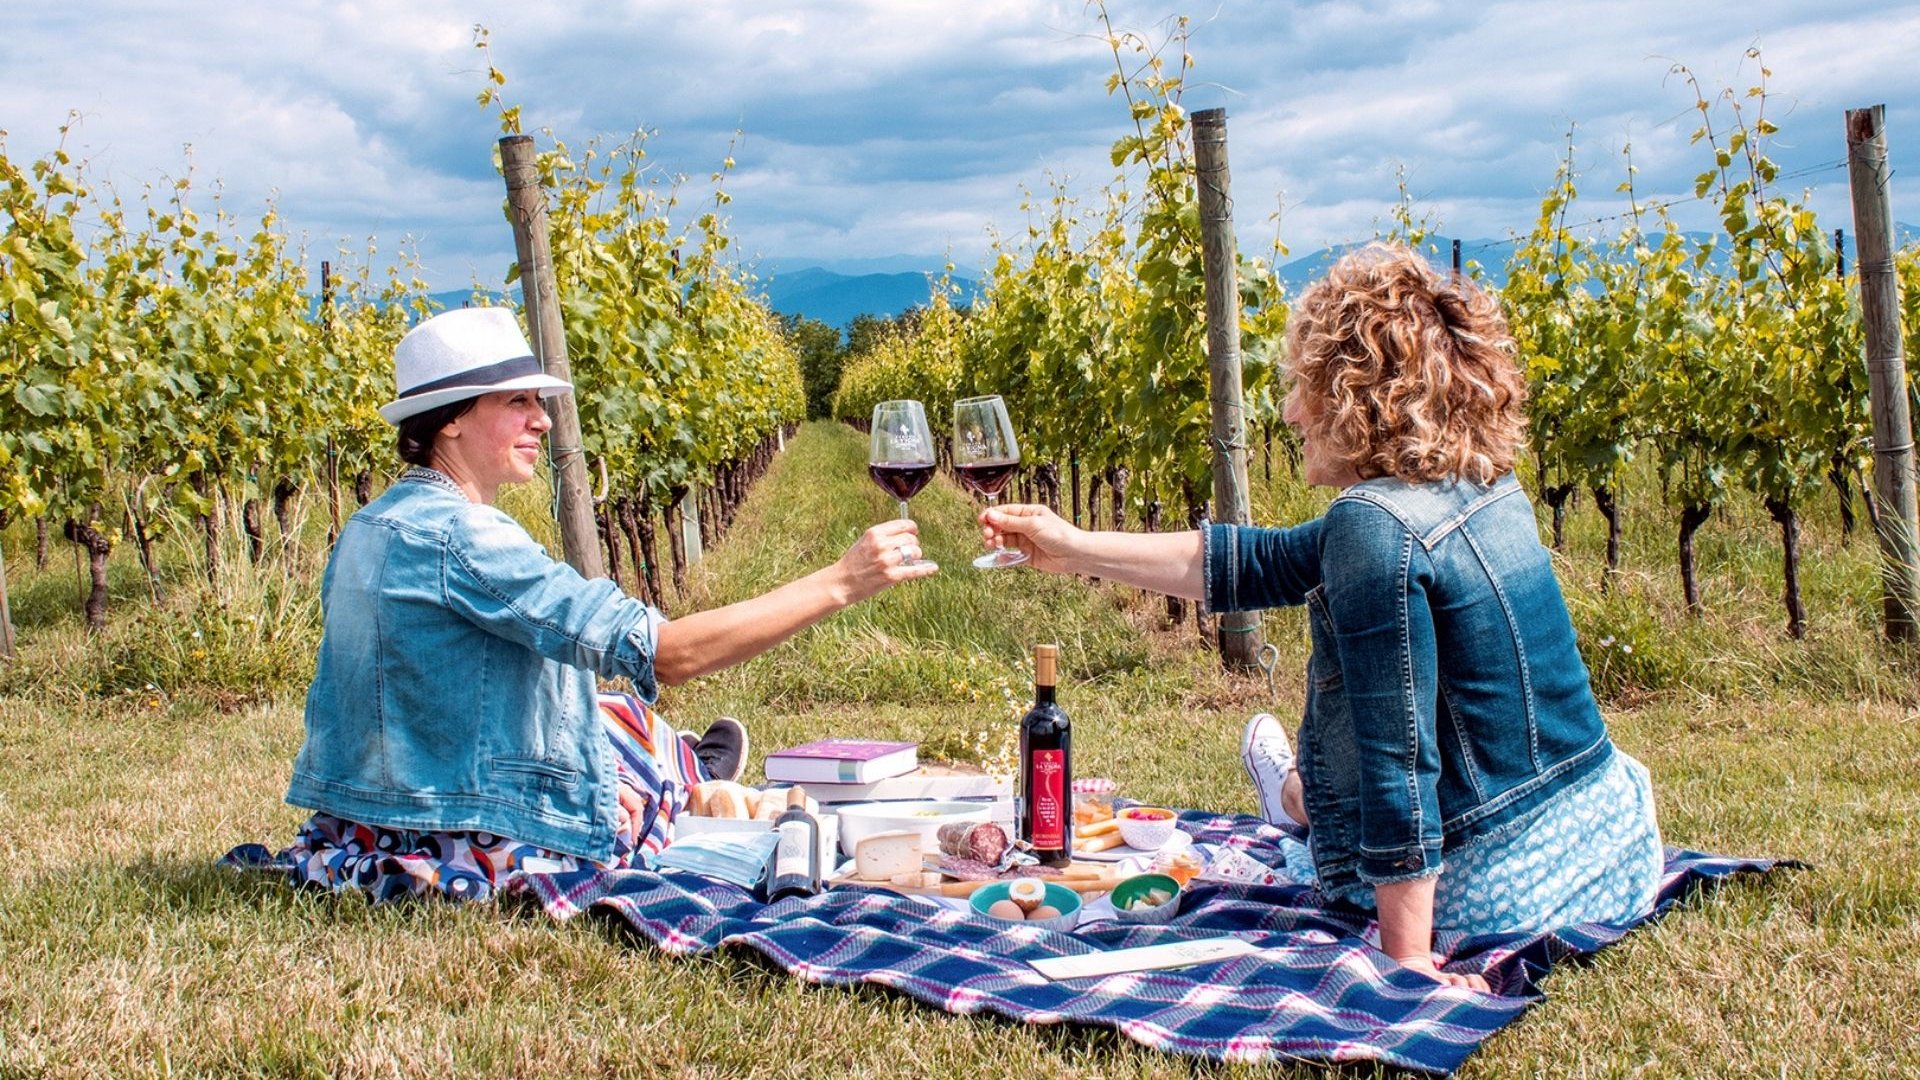 A delicious picnic in the tuscan countryside based on typical products of the area, accompanied by a bottle of Rosso di Montepulciano.